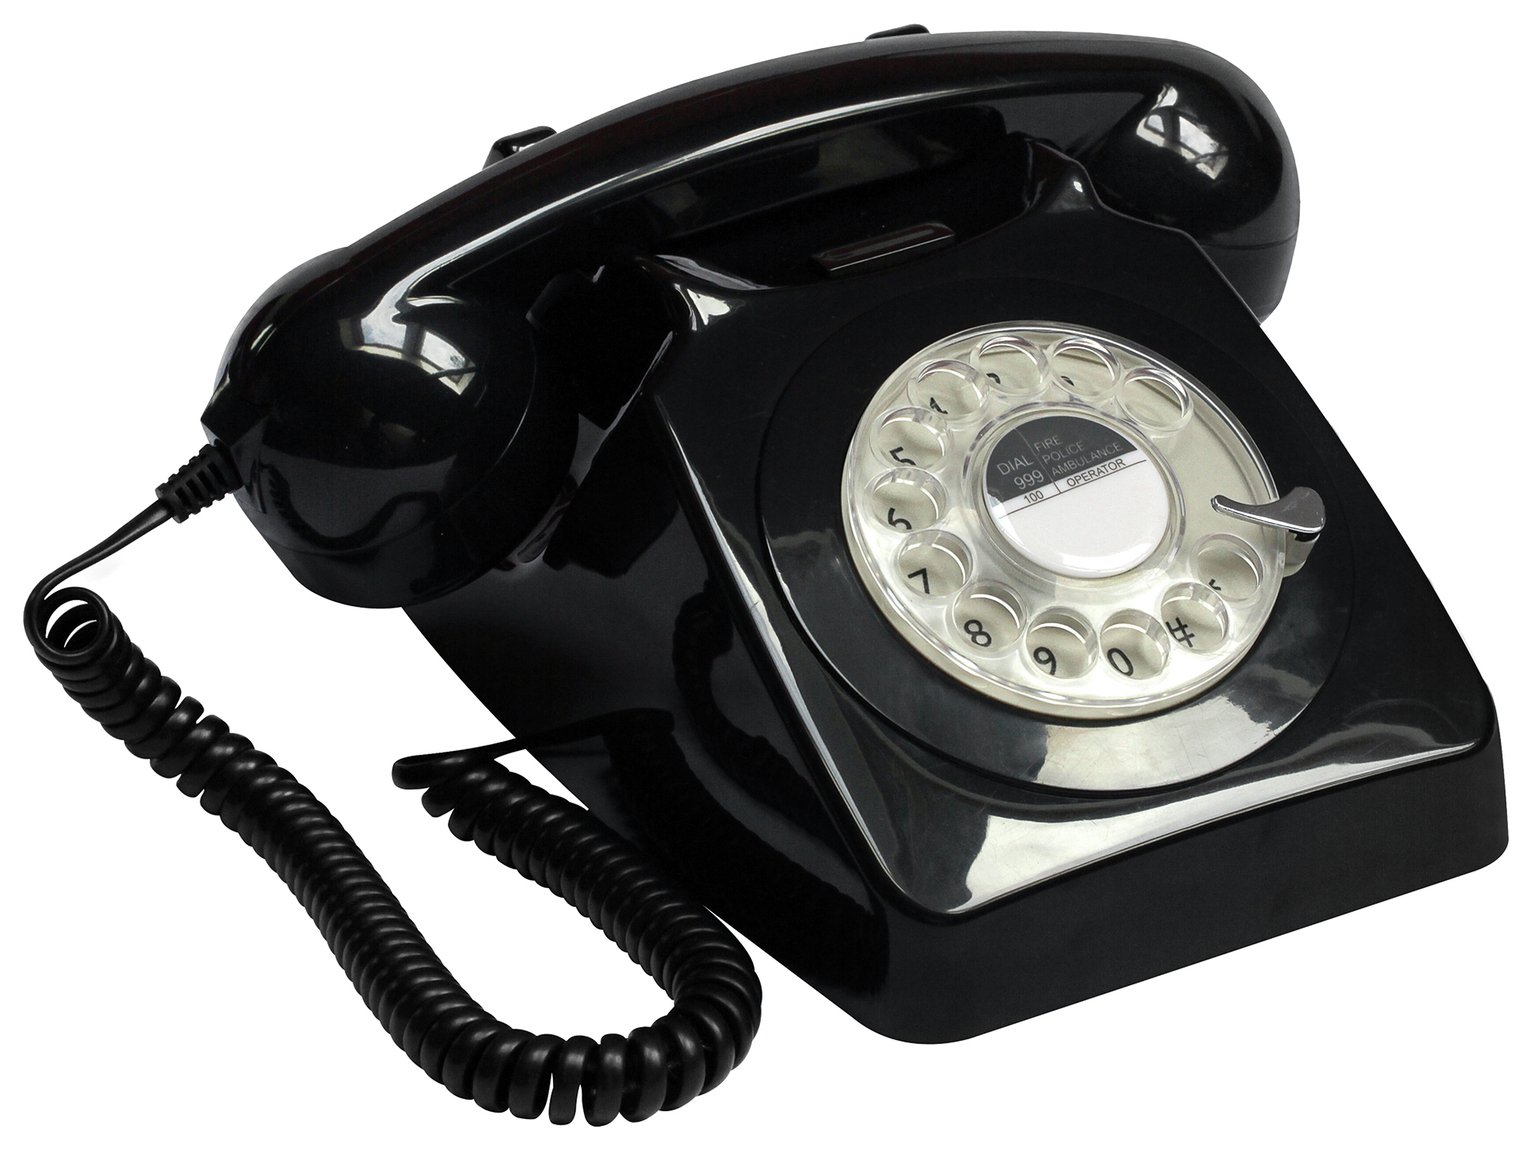 GPO 746 Rotary Dial Corded Telephone review